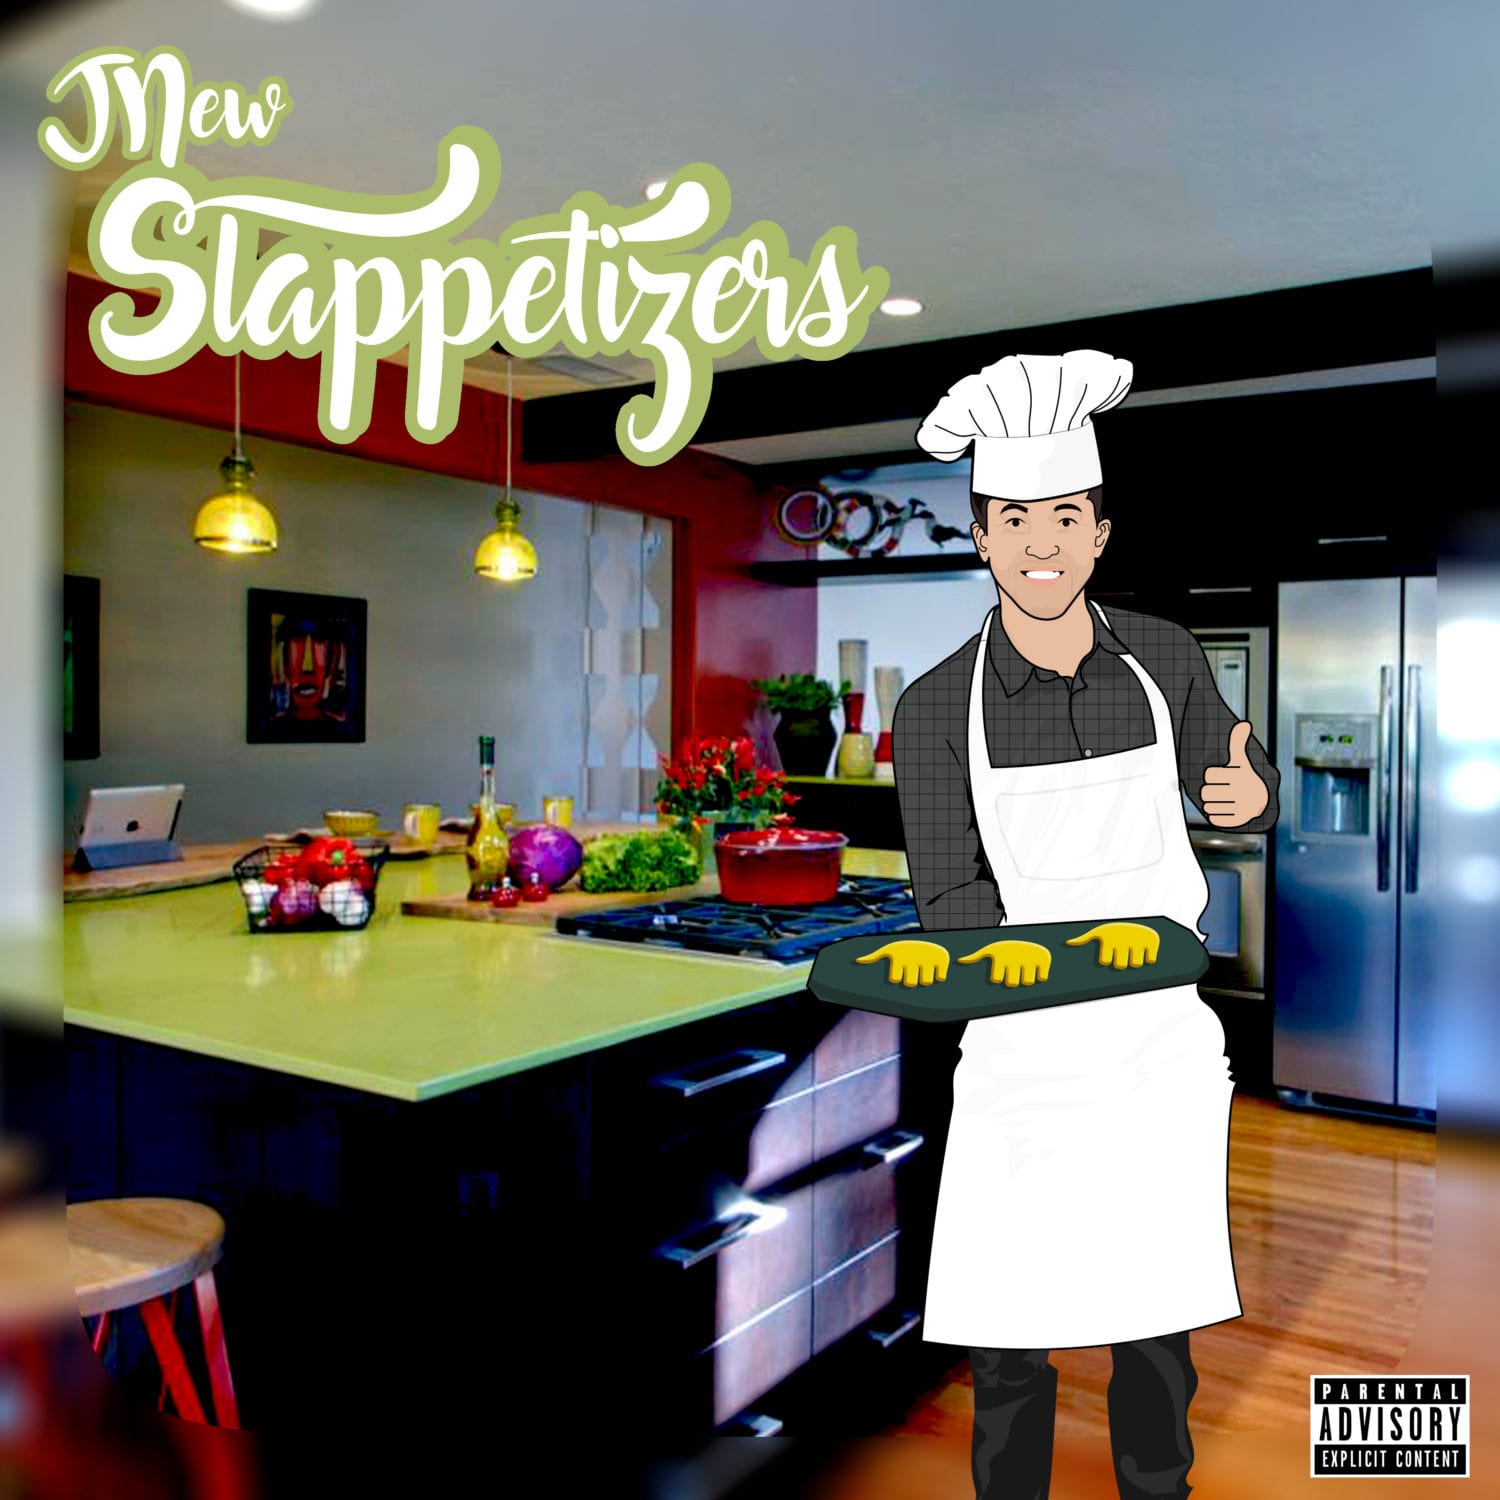 New Project By JNew - "Slappetizers" EP